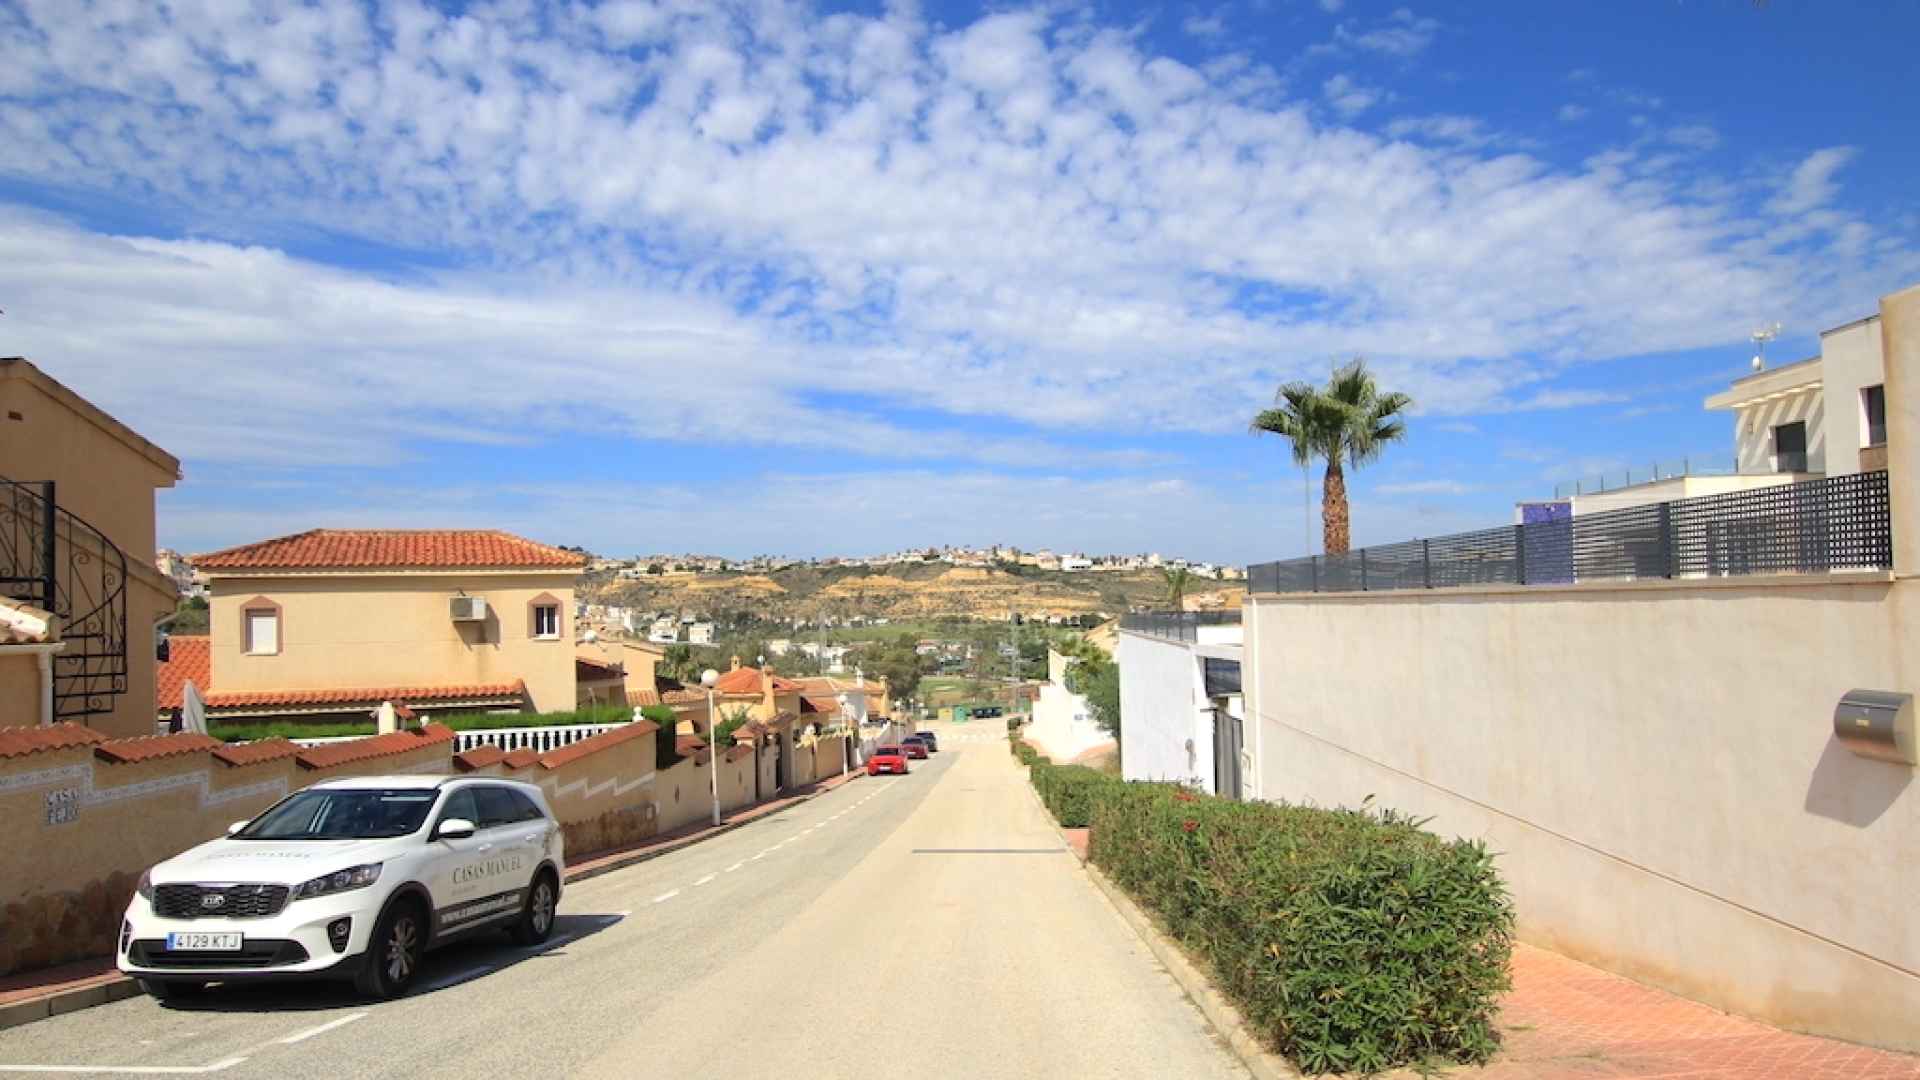 48100_charming_3_bedroom_detached_villa_with_golf_course_views_310523142110_img_3952